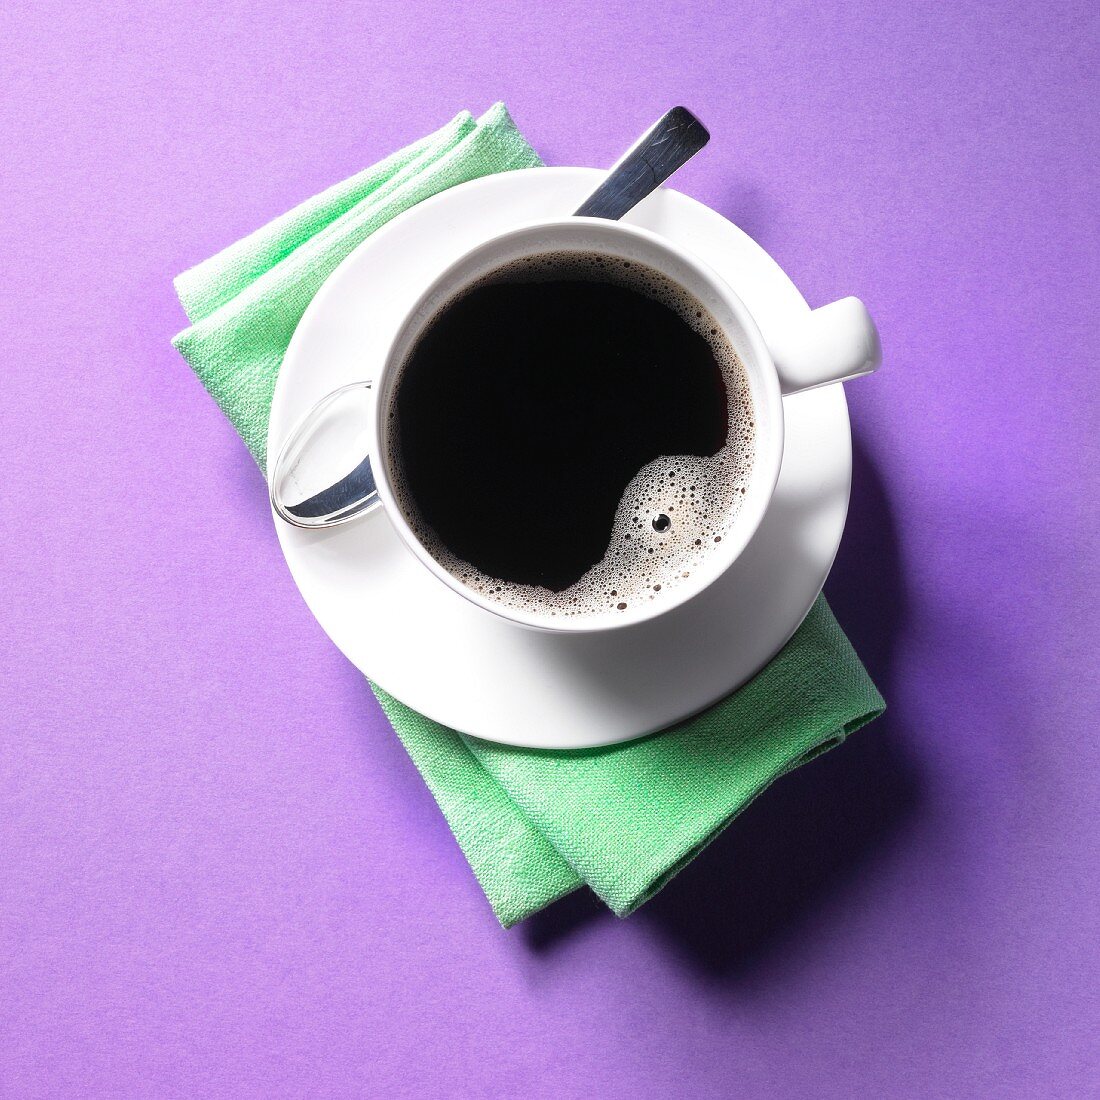 A cup of black coffee on a purple surface